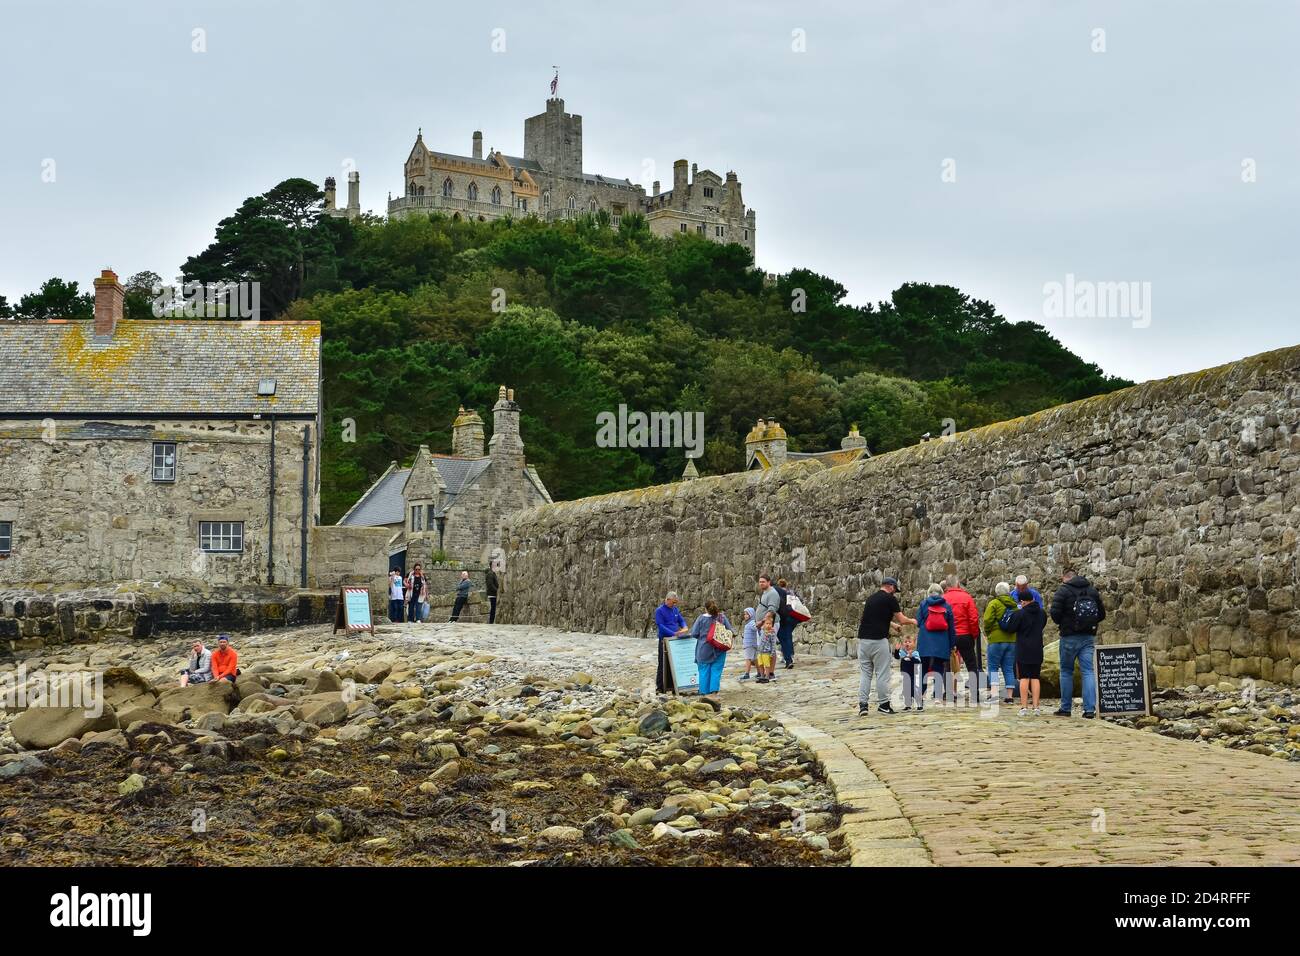 St Michael's Mount in Cornwall connecting to Marazion with a causeway which submerges under the water at high tide Stock Photo